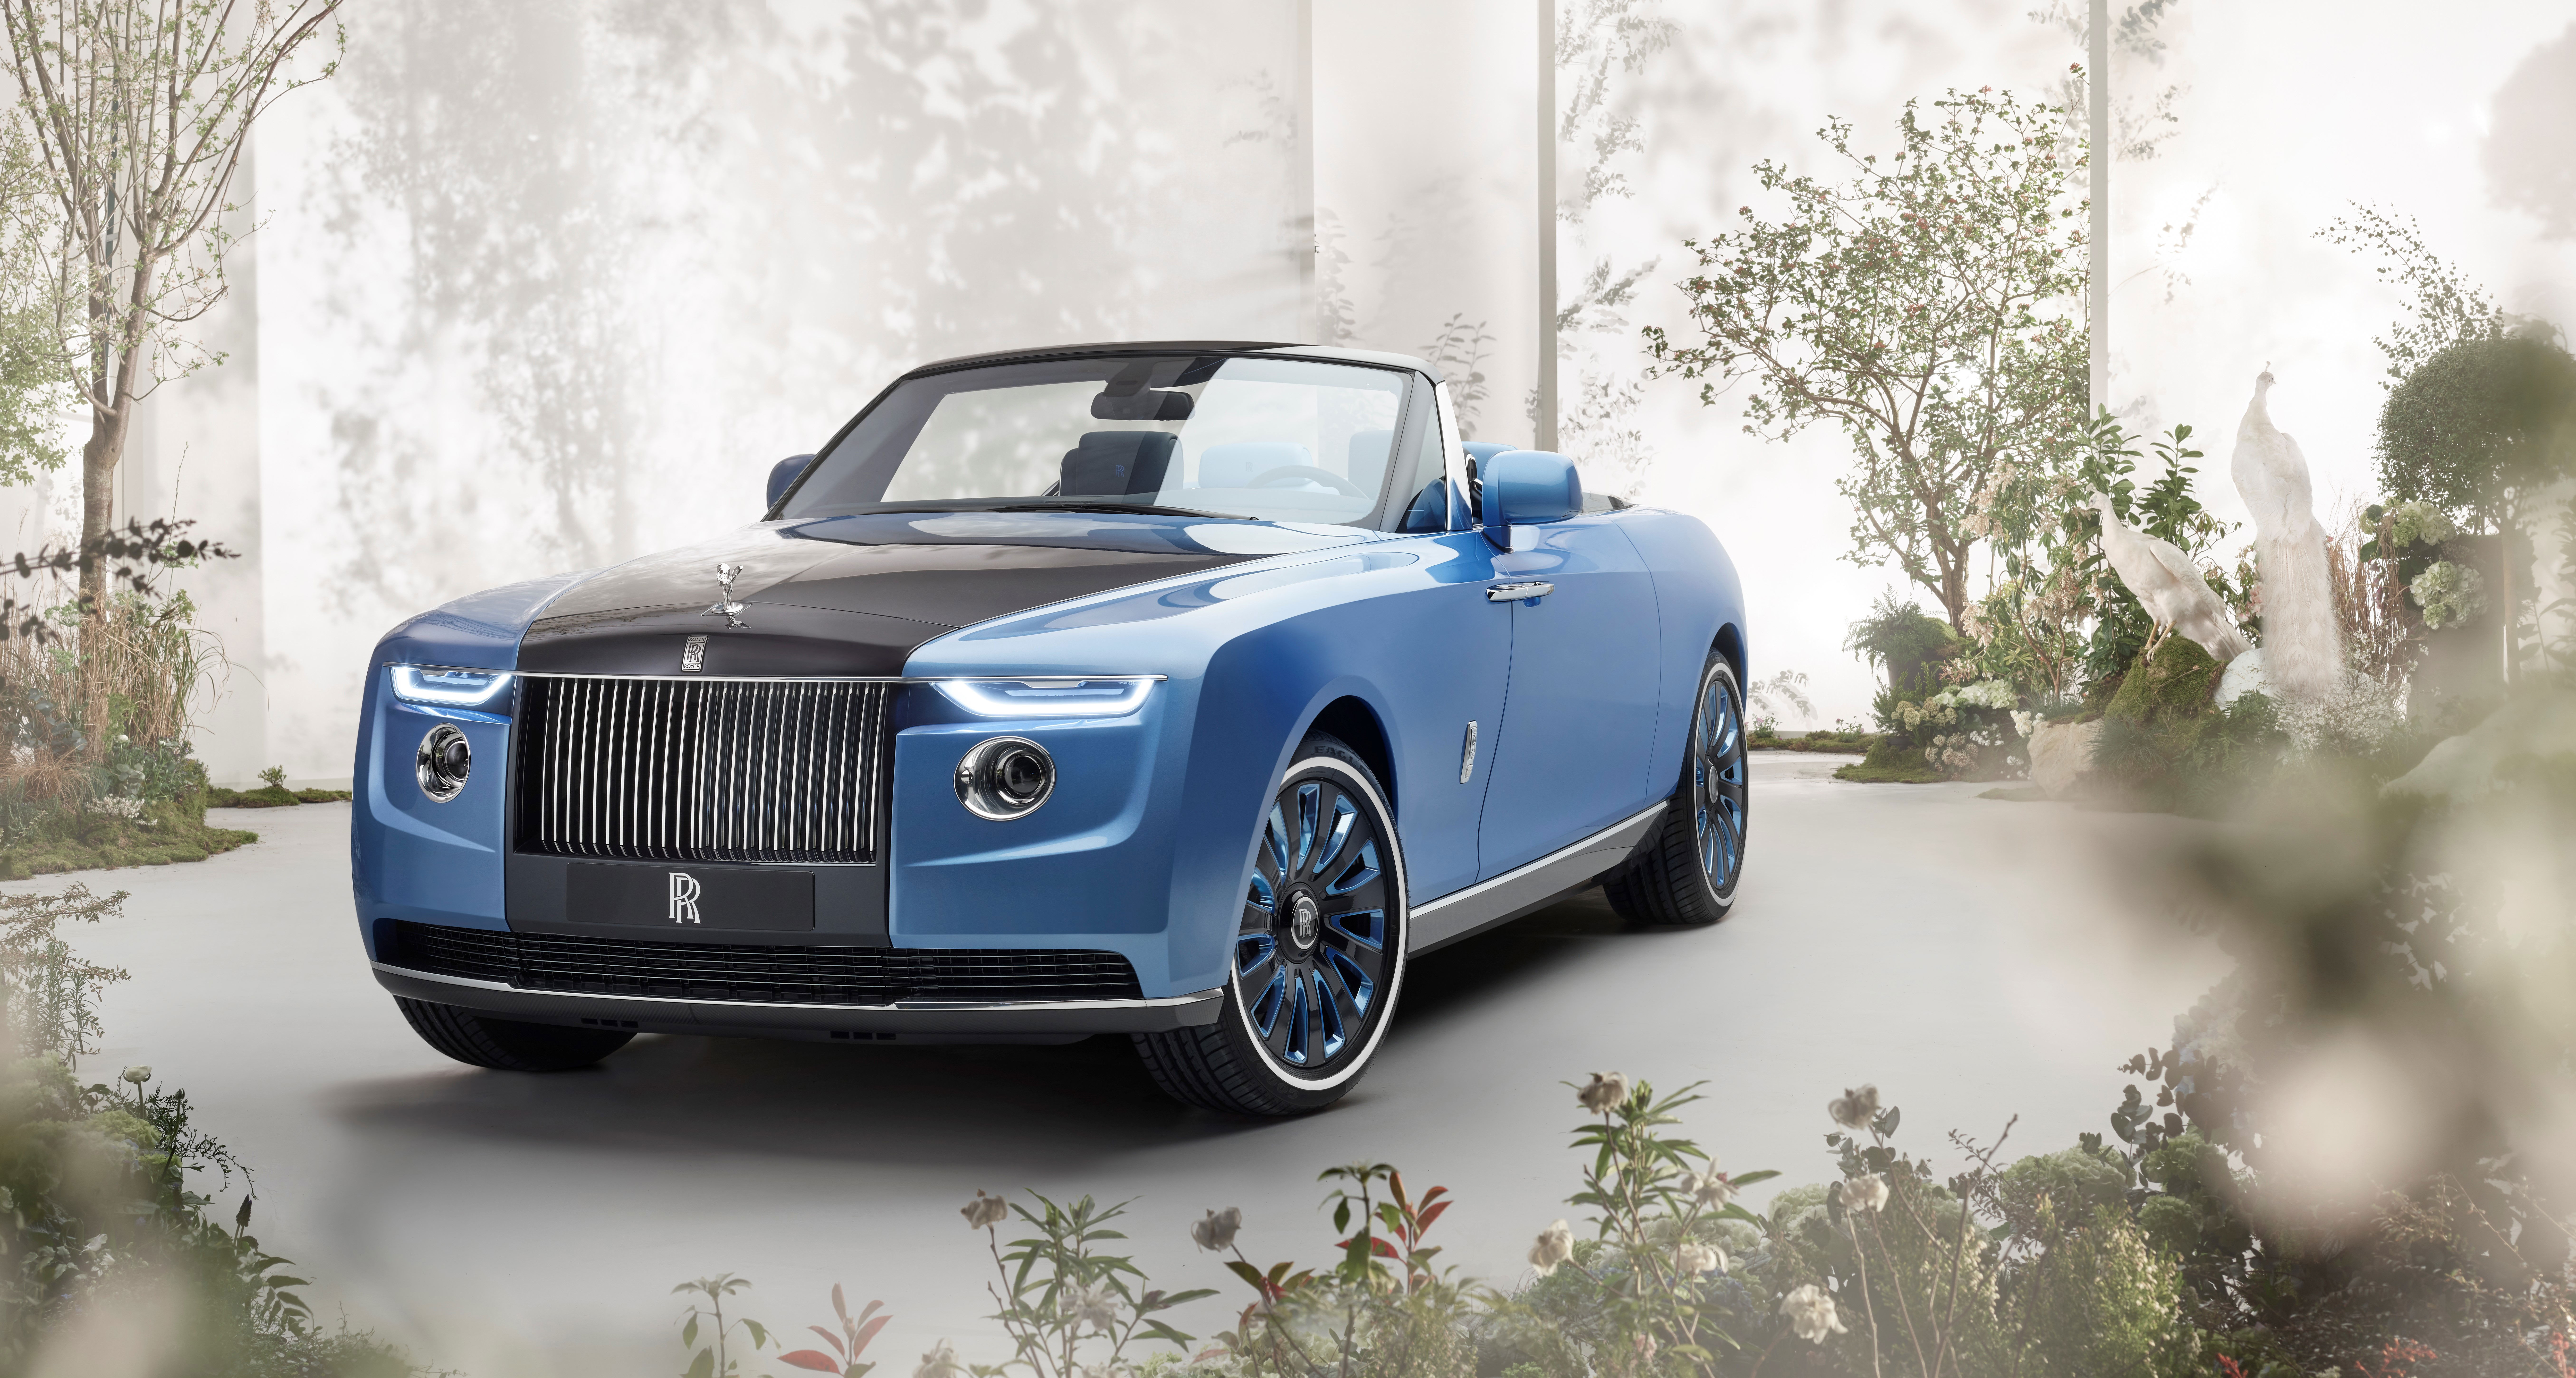 The most expensive road-legal luxury car in the world - Rolls-Royce Boat Tail.